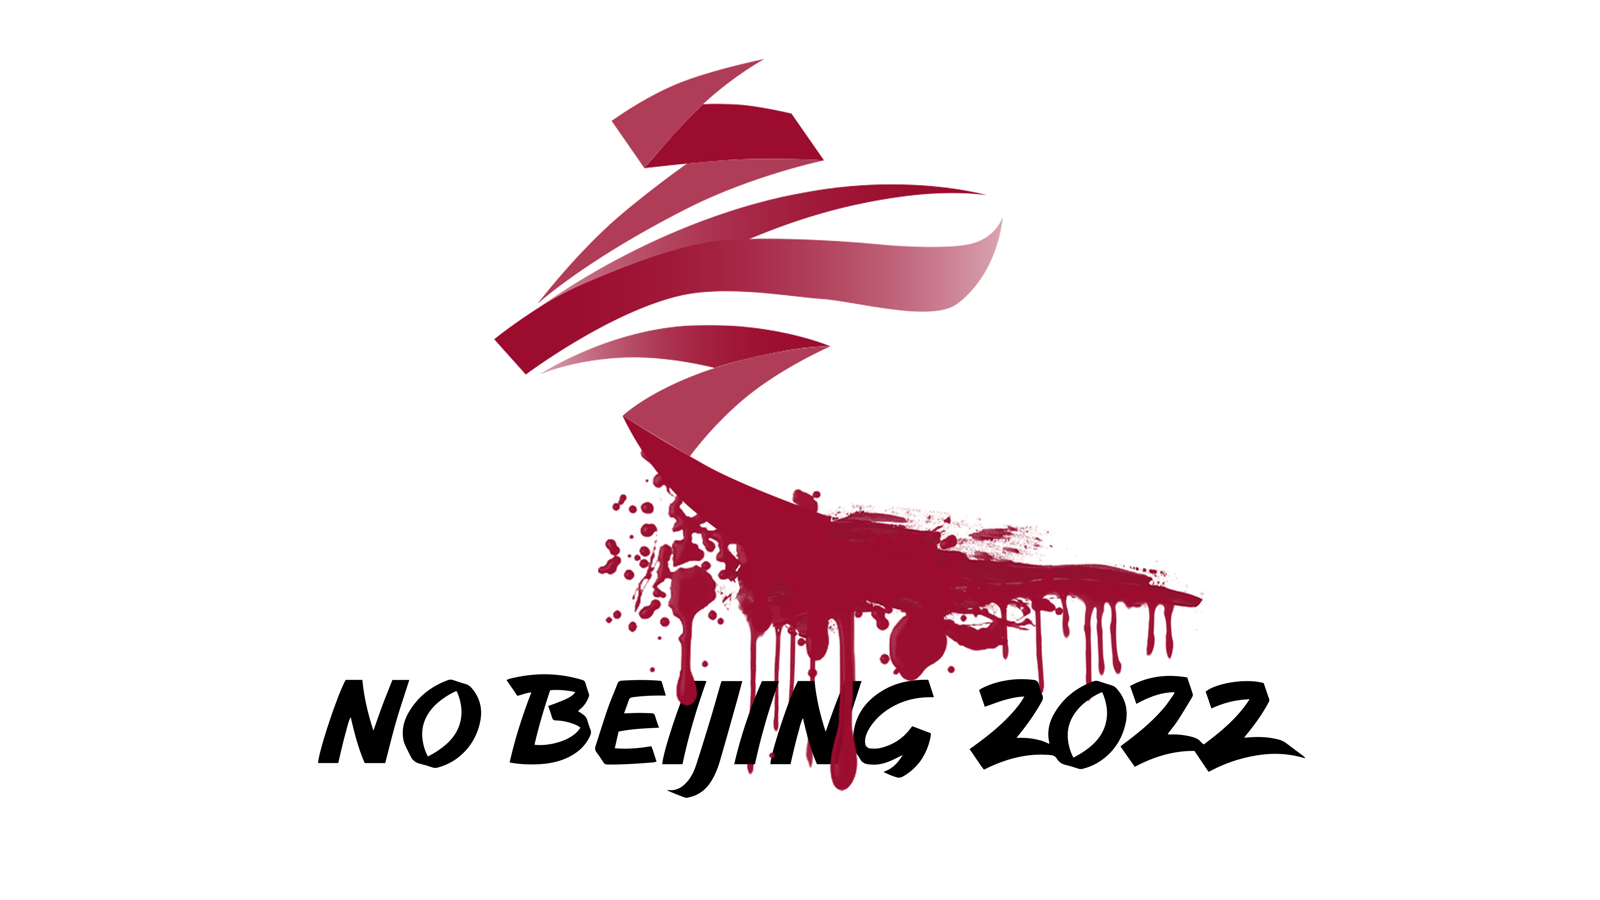 Beijing 2022: ACTIVISTS CALL FOR IOC PRESIDENT THOMAS BACH TO BE FIRED STATING THE OLYMPICS COMMITTEE IS ‘UNFIT FOR PURPOSE’